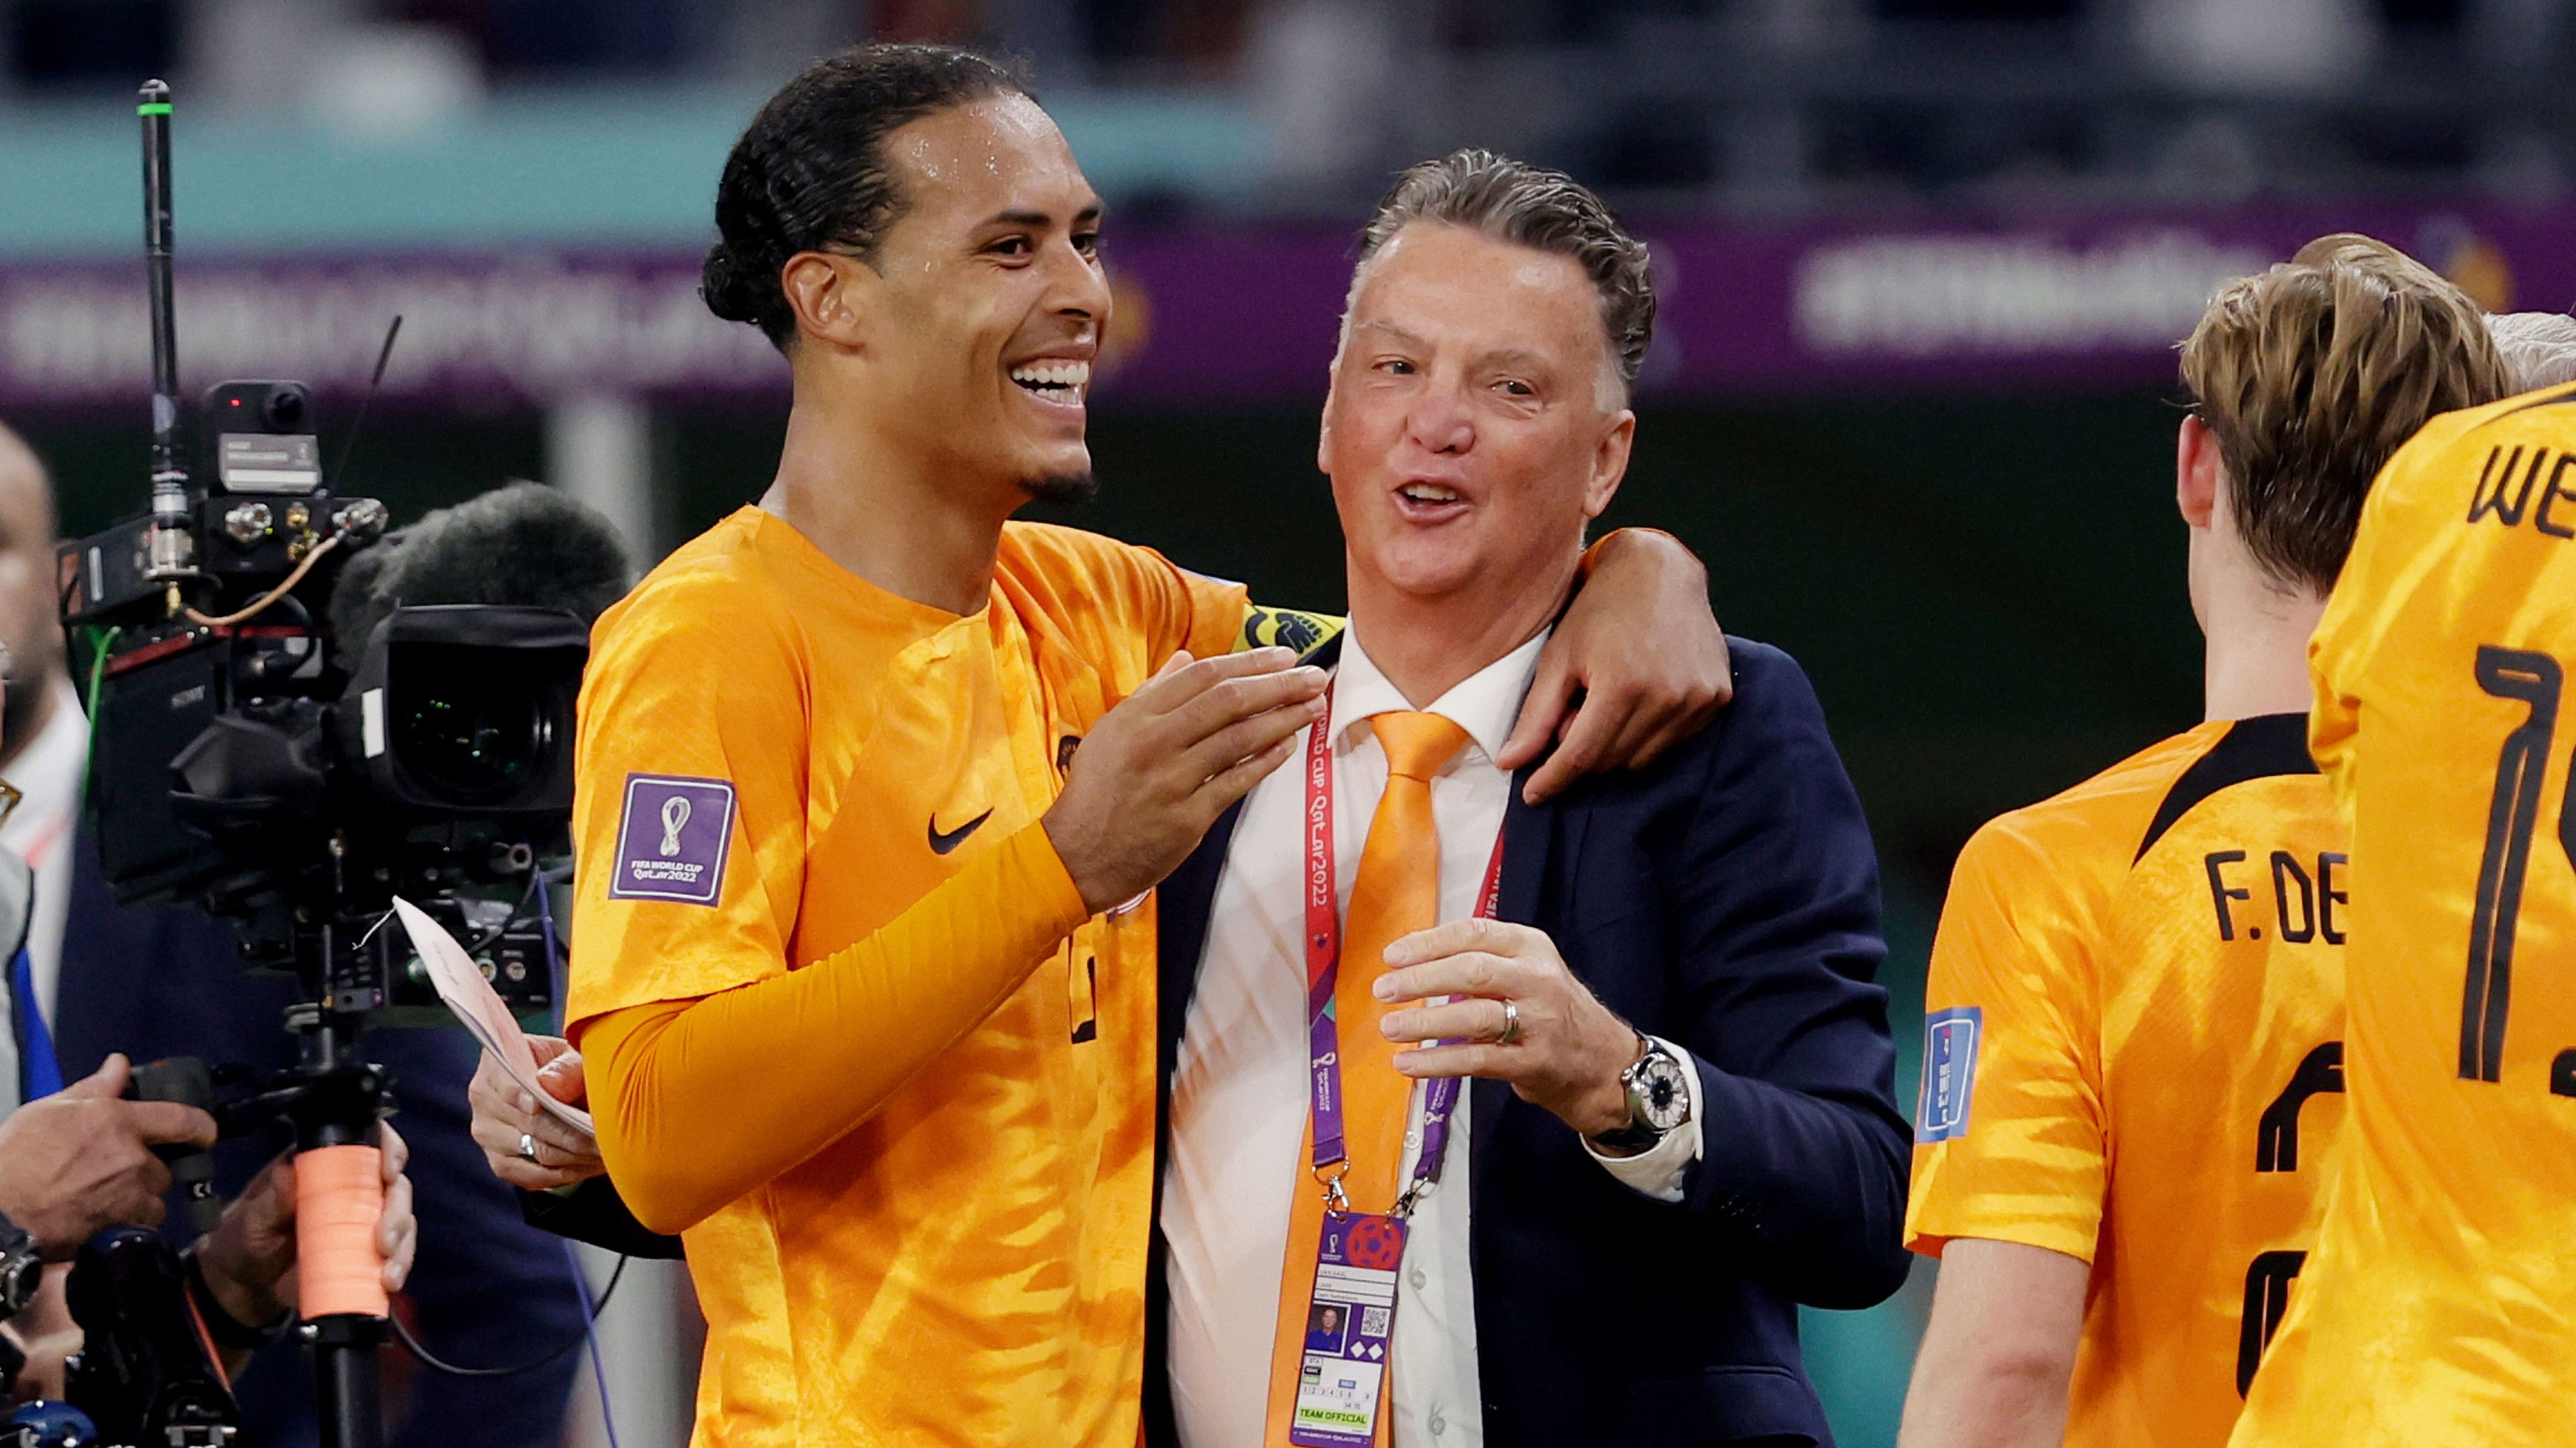 Virgil van Dijk with Netherlands coach Louis van Gaal, celebrating victory after their round of 16 World Cup clash with Qatar.